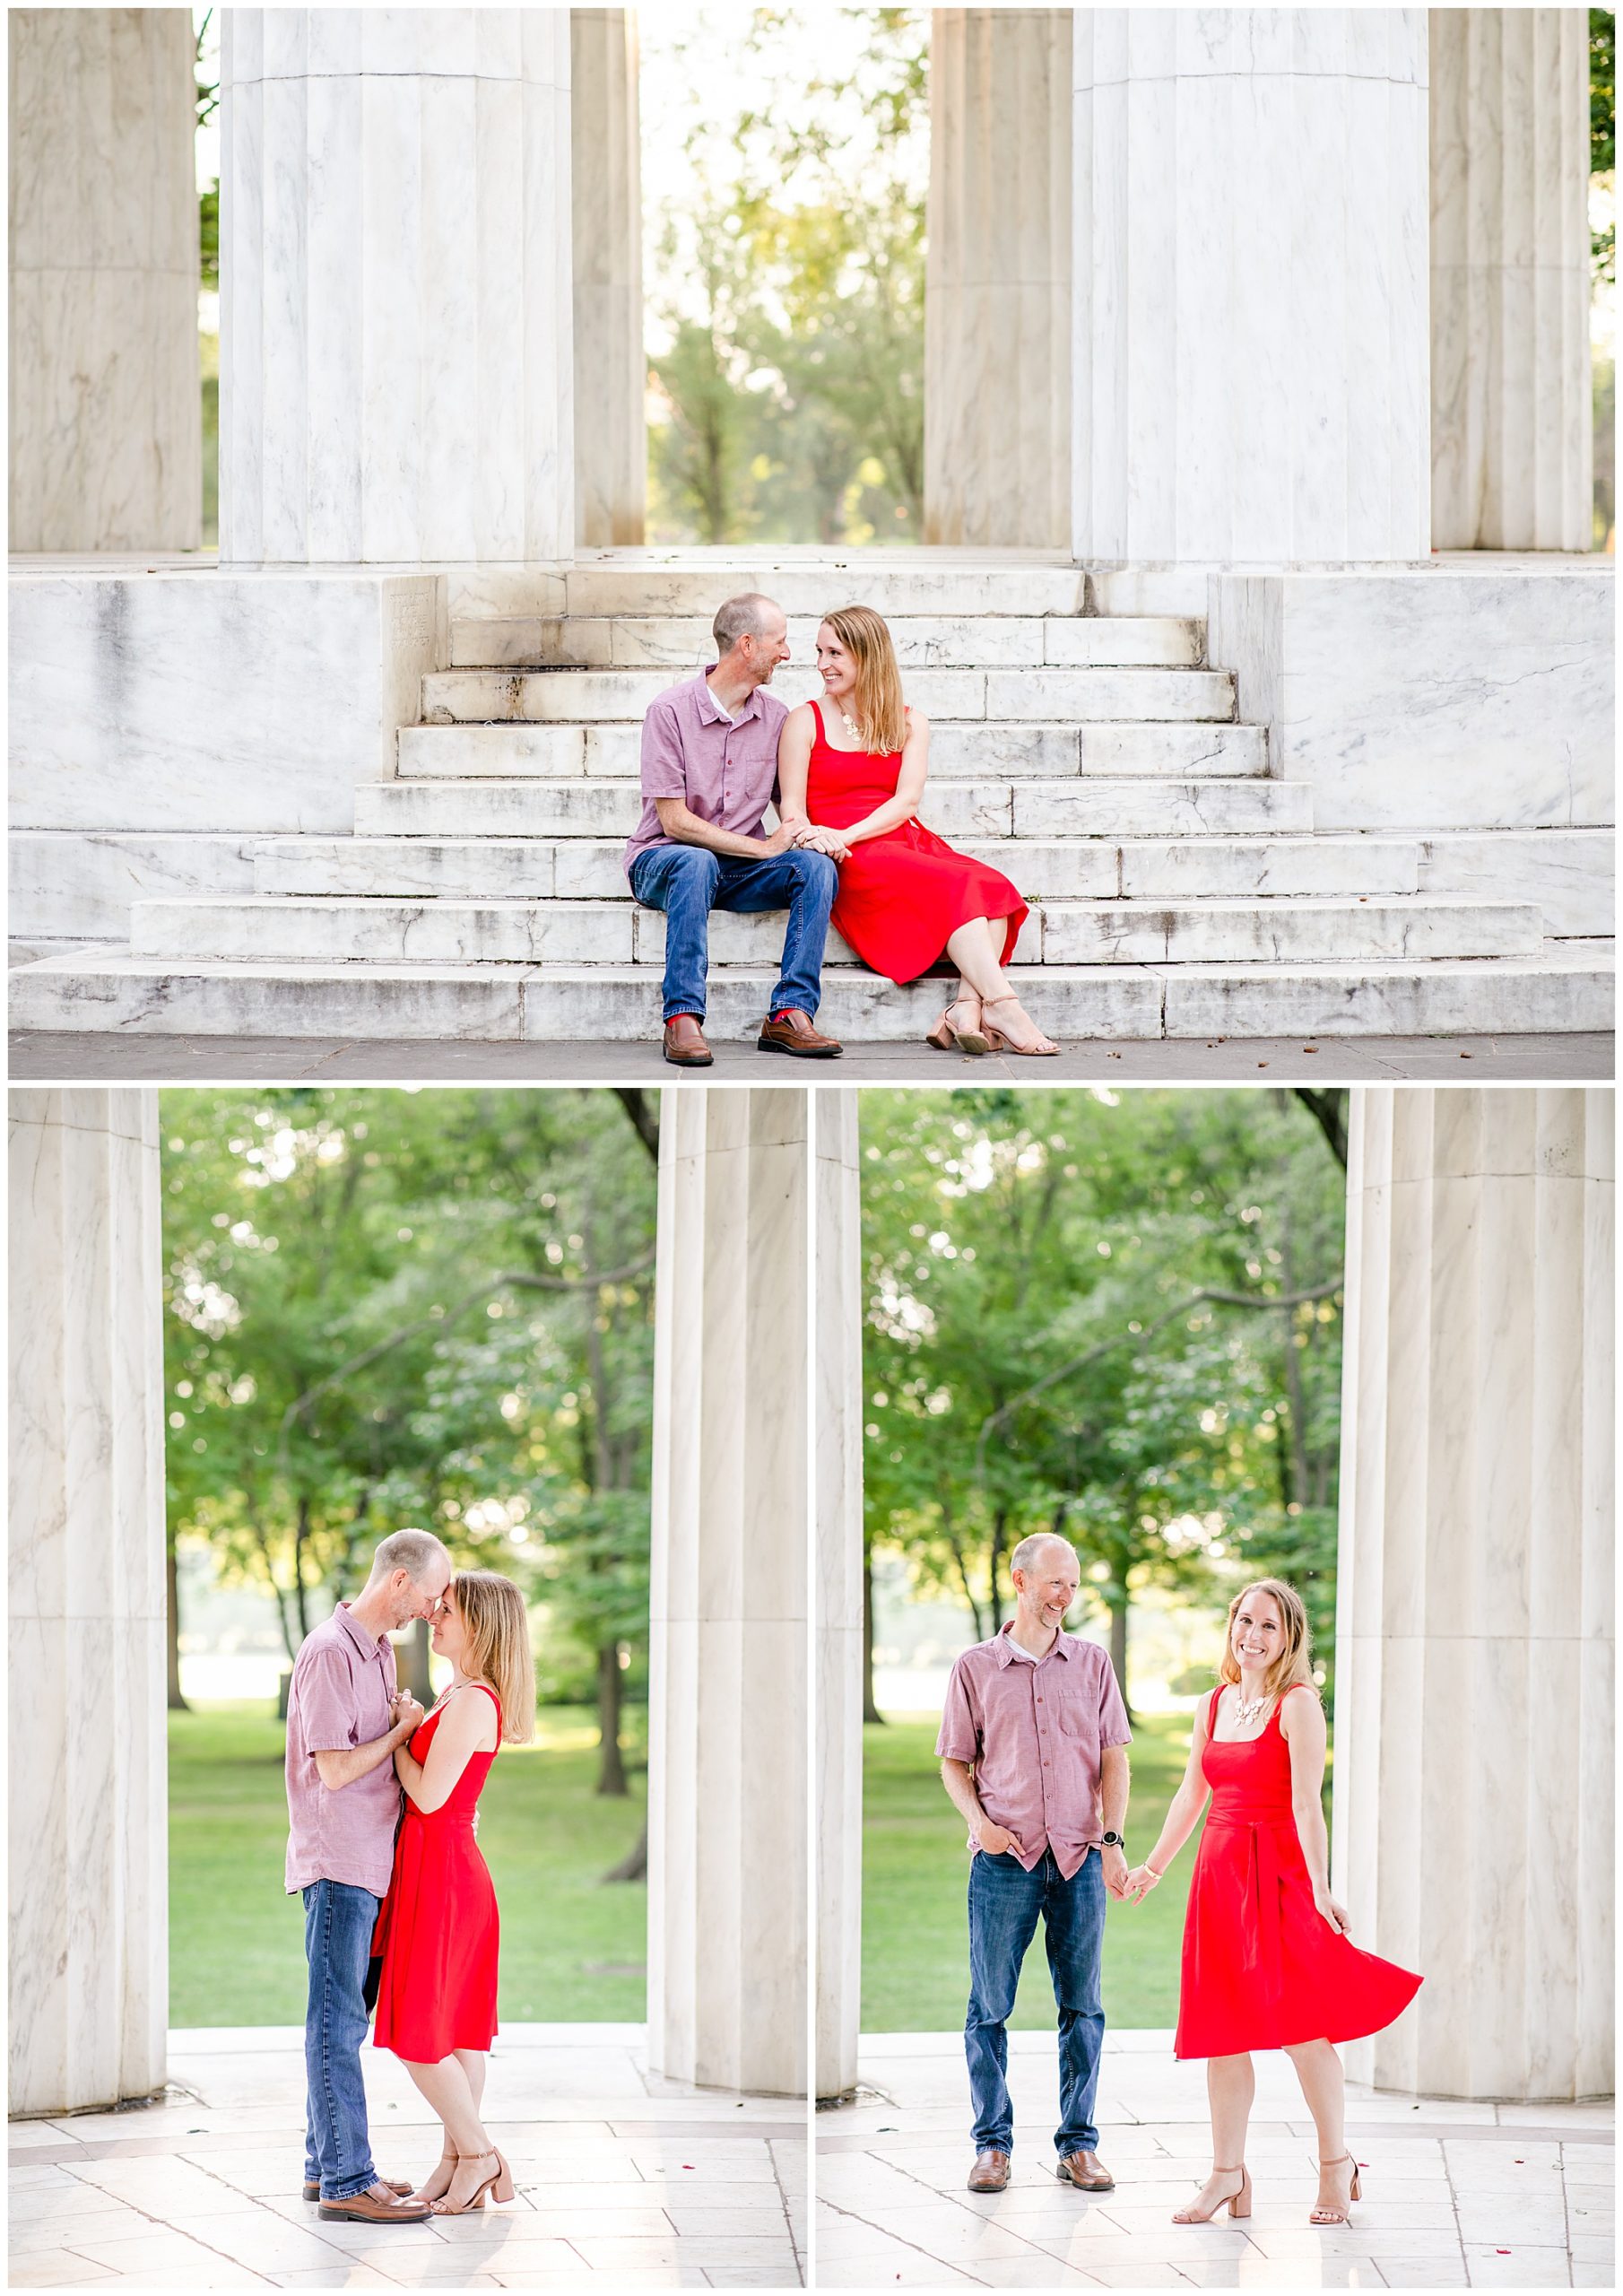 casual Lincoln Memorial engagement photos, casual engagement photos, DC engagement photos, DC engagement photographer, DC wedding photographer, natural light engagement photos, National Mall engagement photos, Rachel E.H. Photography, summer engagement photos, DC couple, red white and blue aesthetic, DC War Memorial